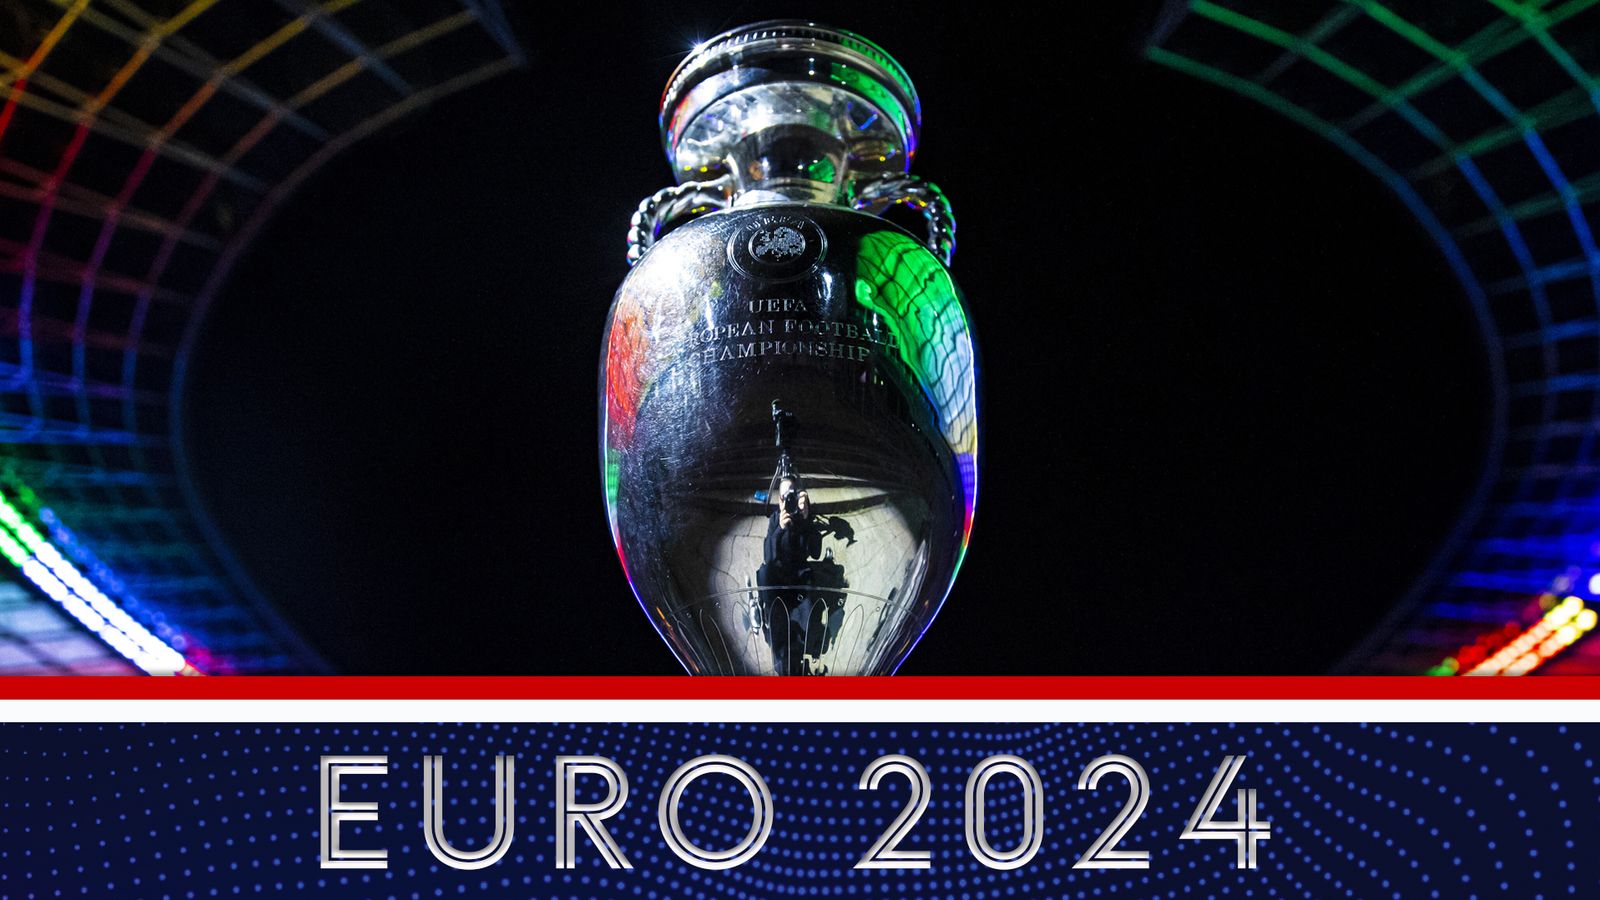 Euro 2024: The Ultimate Battle of Football